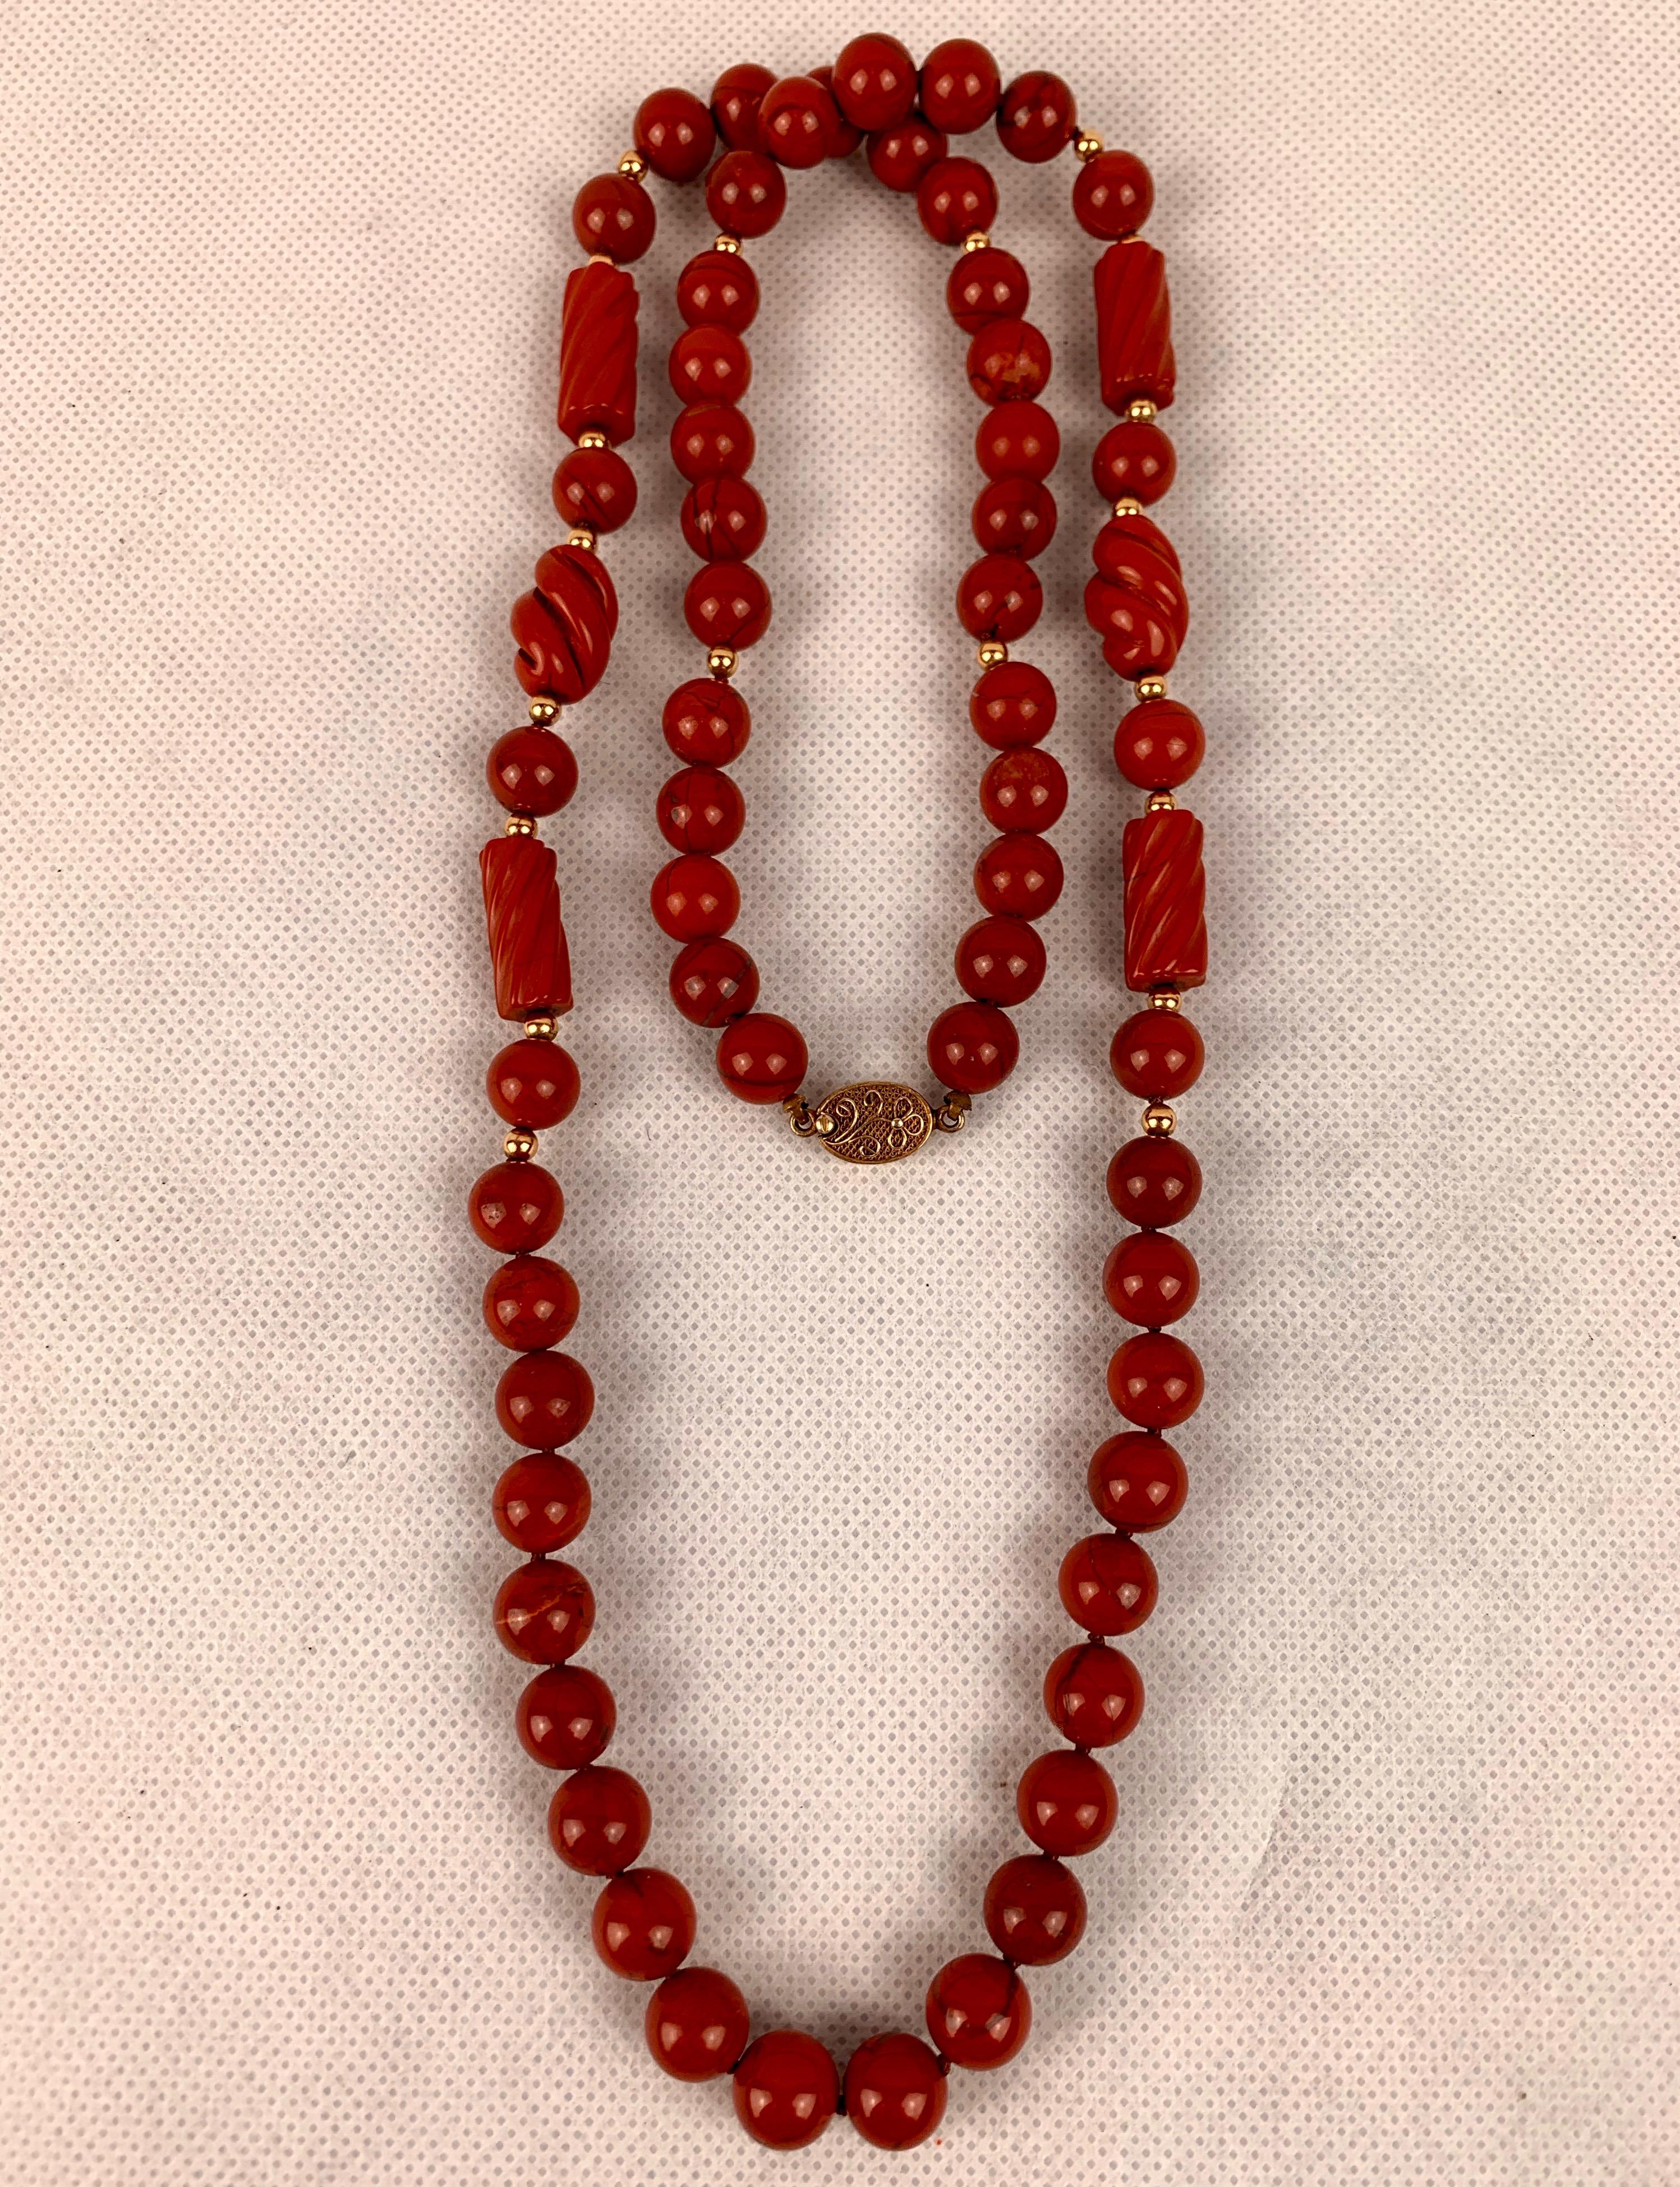 Round Cut  Matched Red Jasper Bead Necklace with 14 Karat Gold Spacers- 31